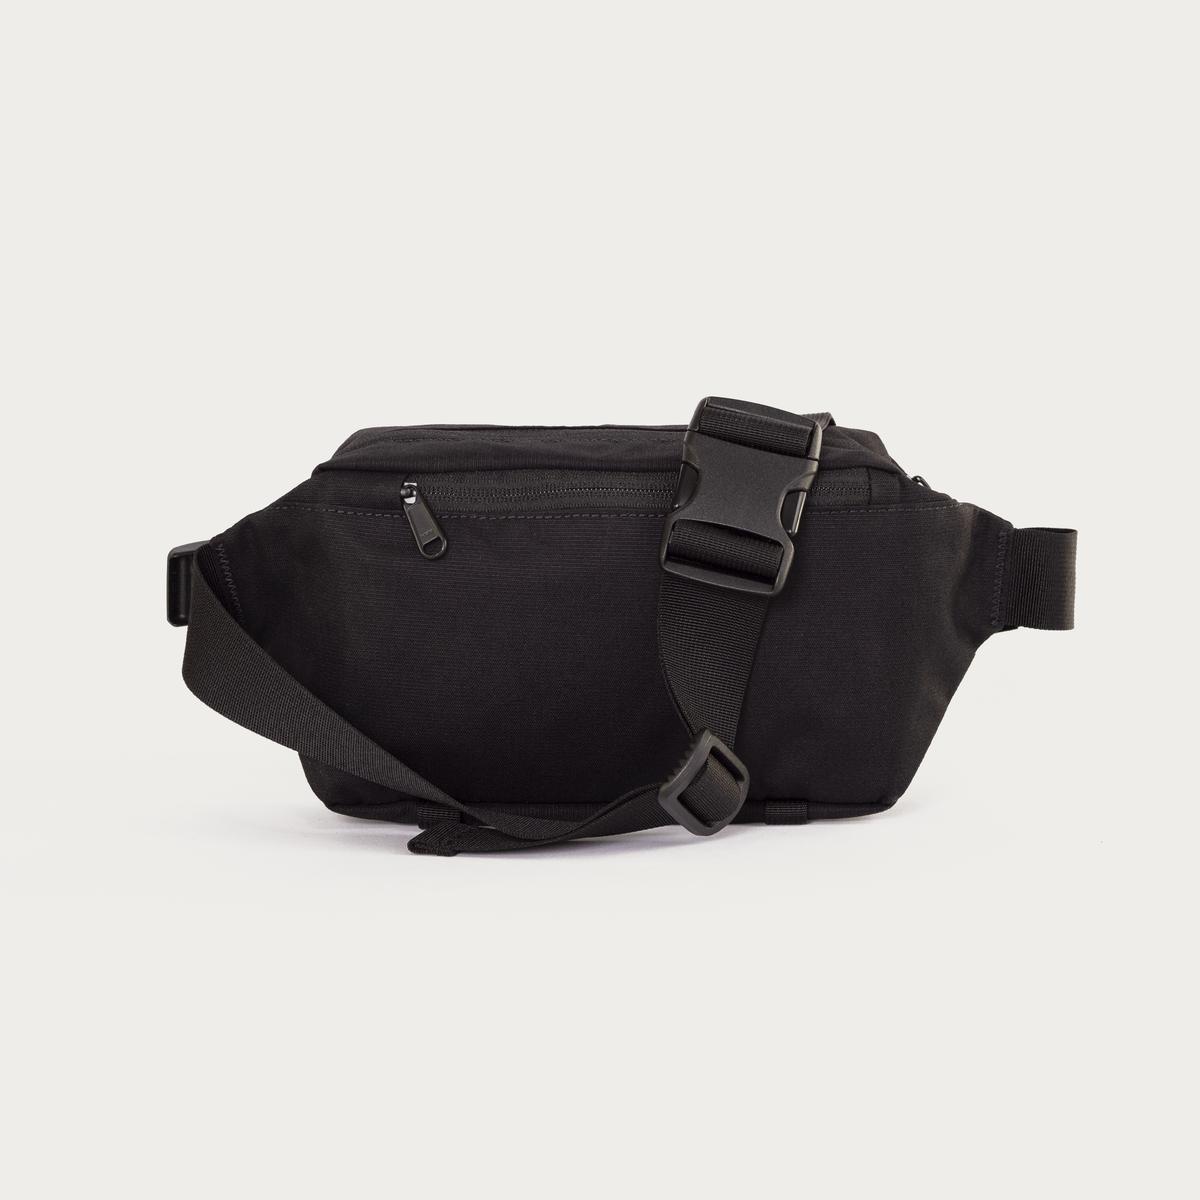 Moment - Fanny Sling - A Fanny Pack You Can Sling